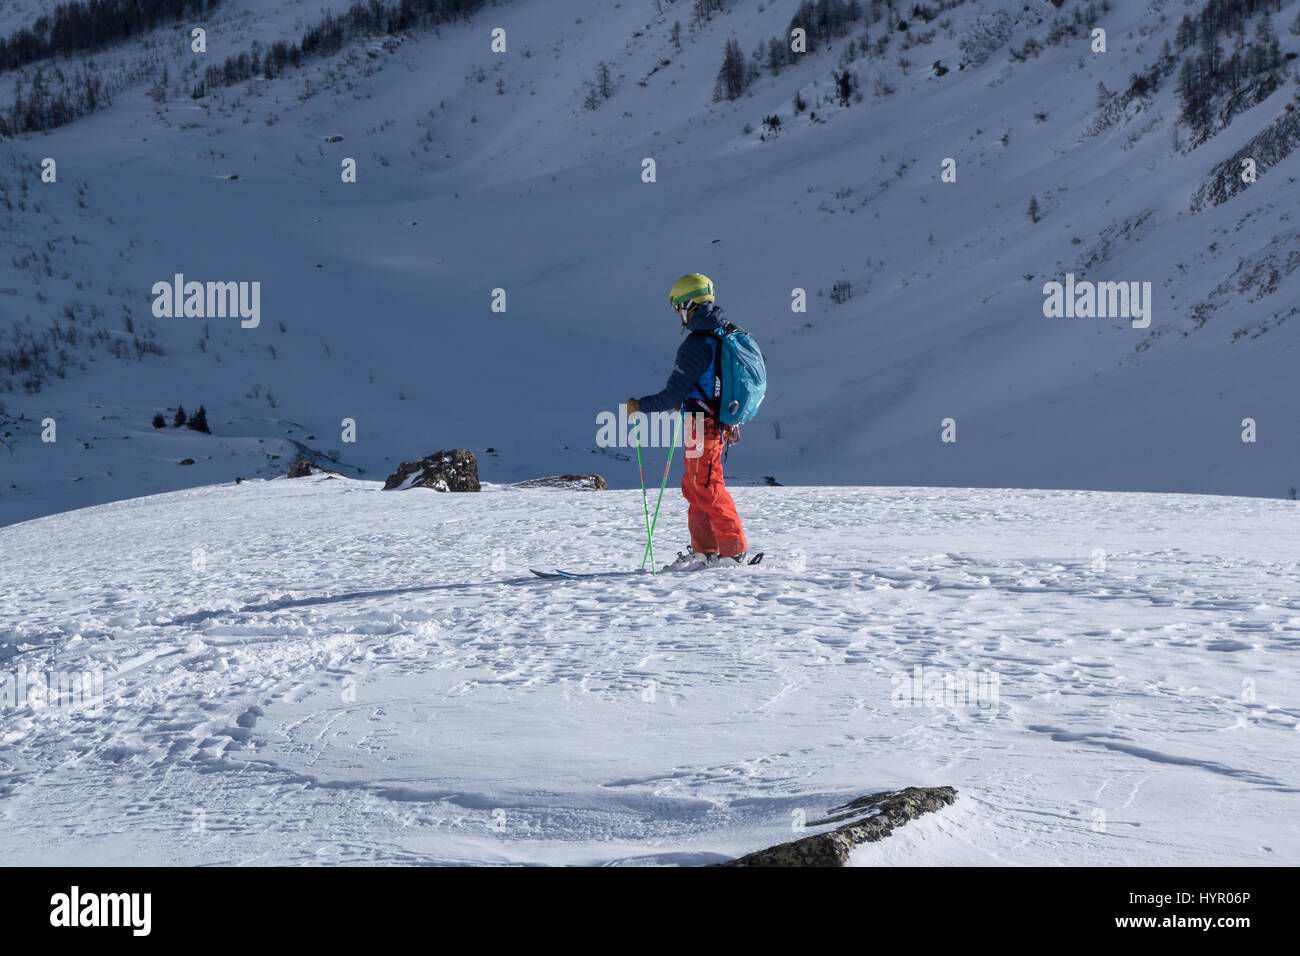 Courmayeur, Italy - January 16, 2017: Single skier assessing route choice ahead before sking down into mountain valley Stock Photo